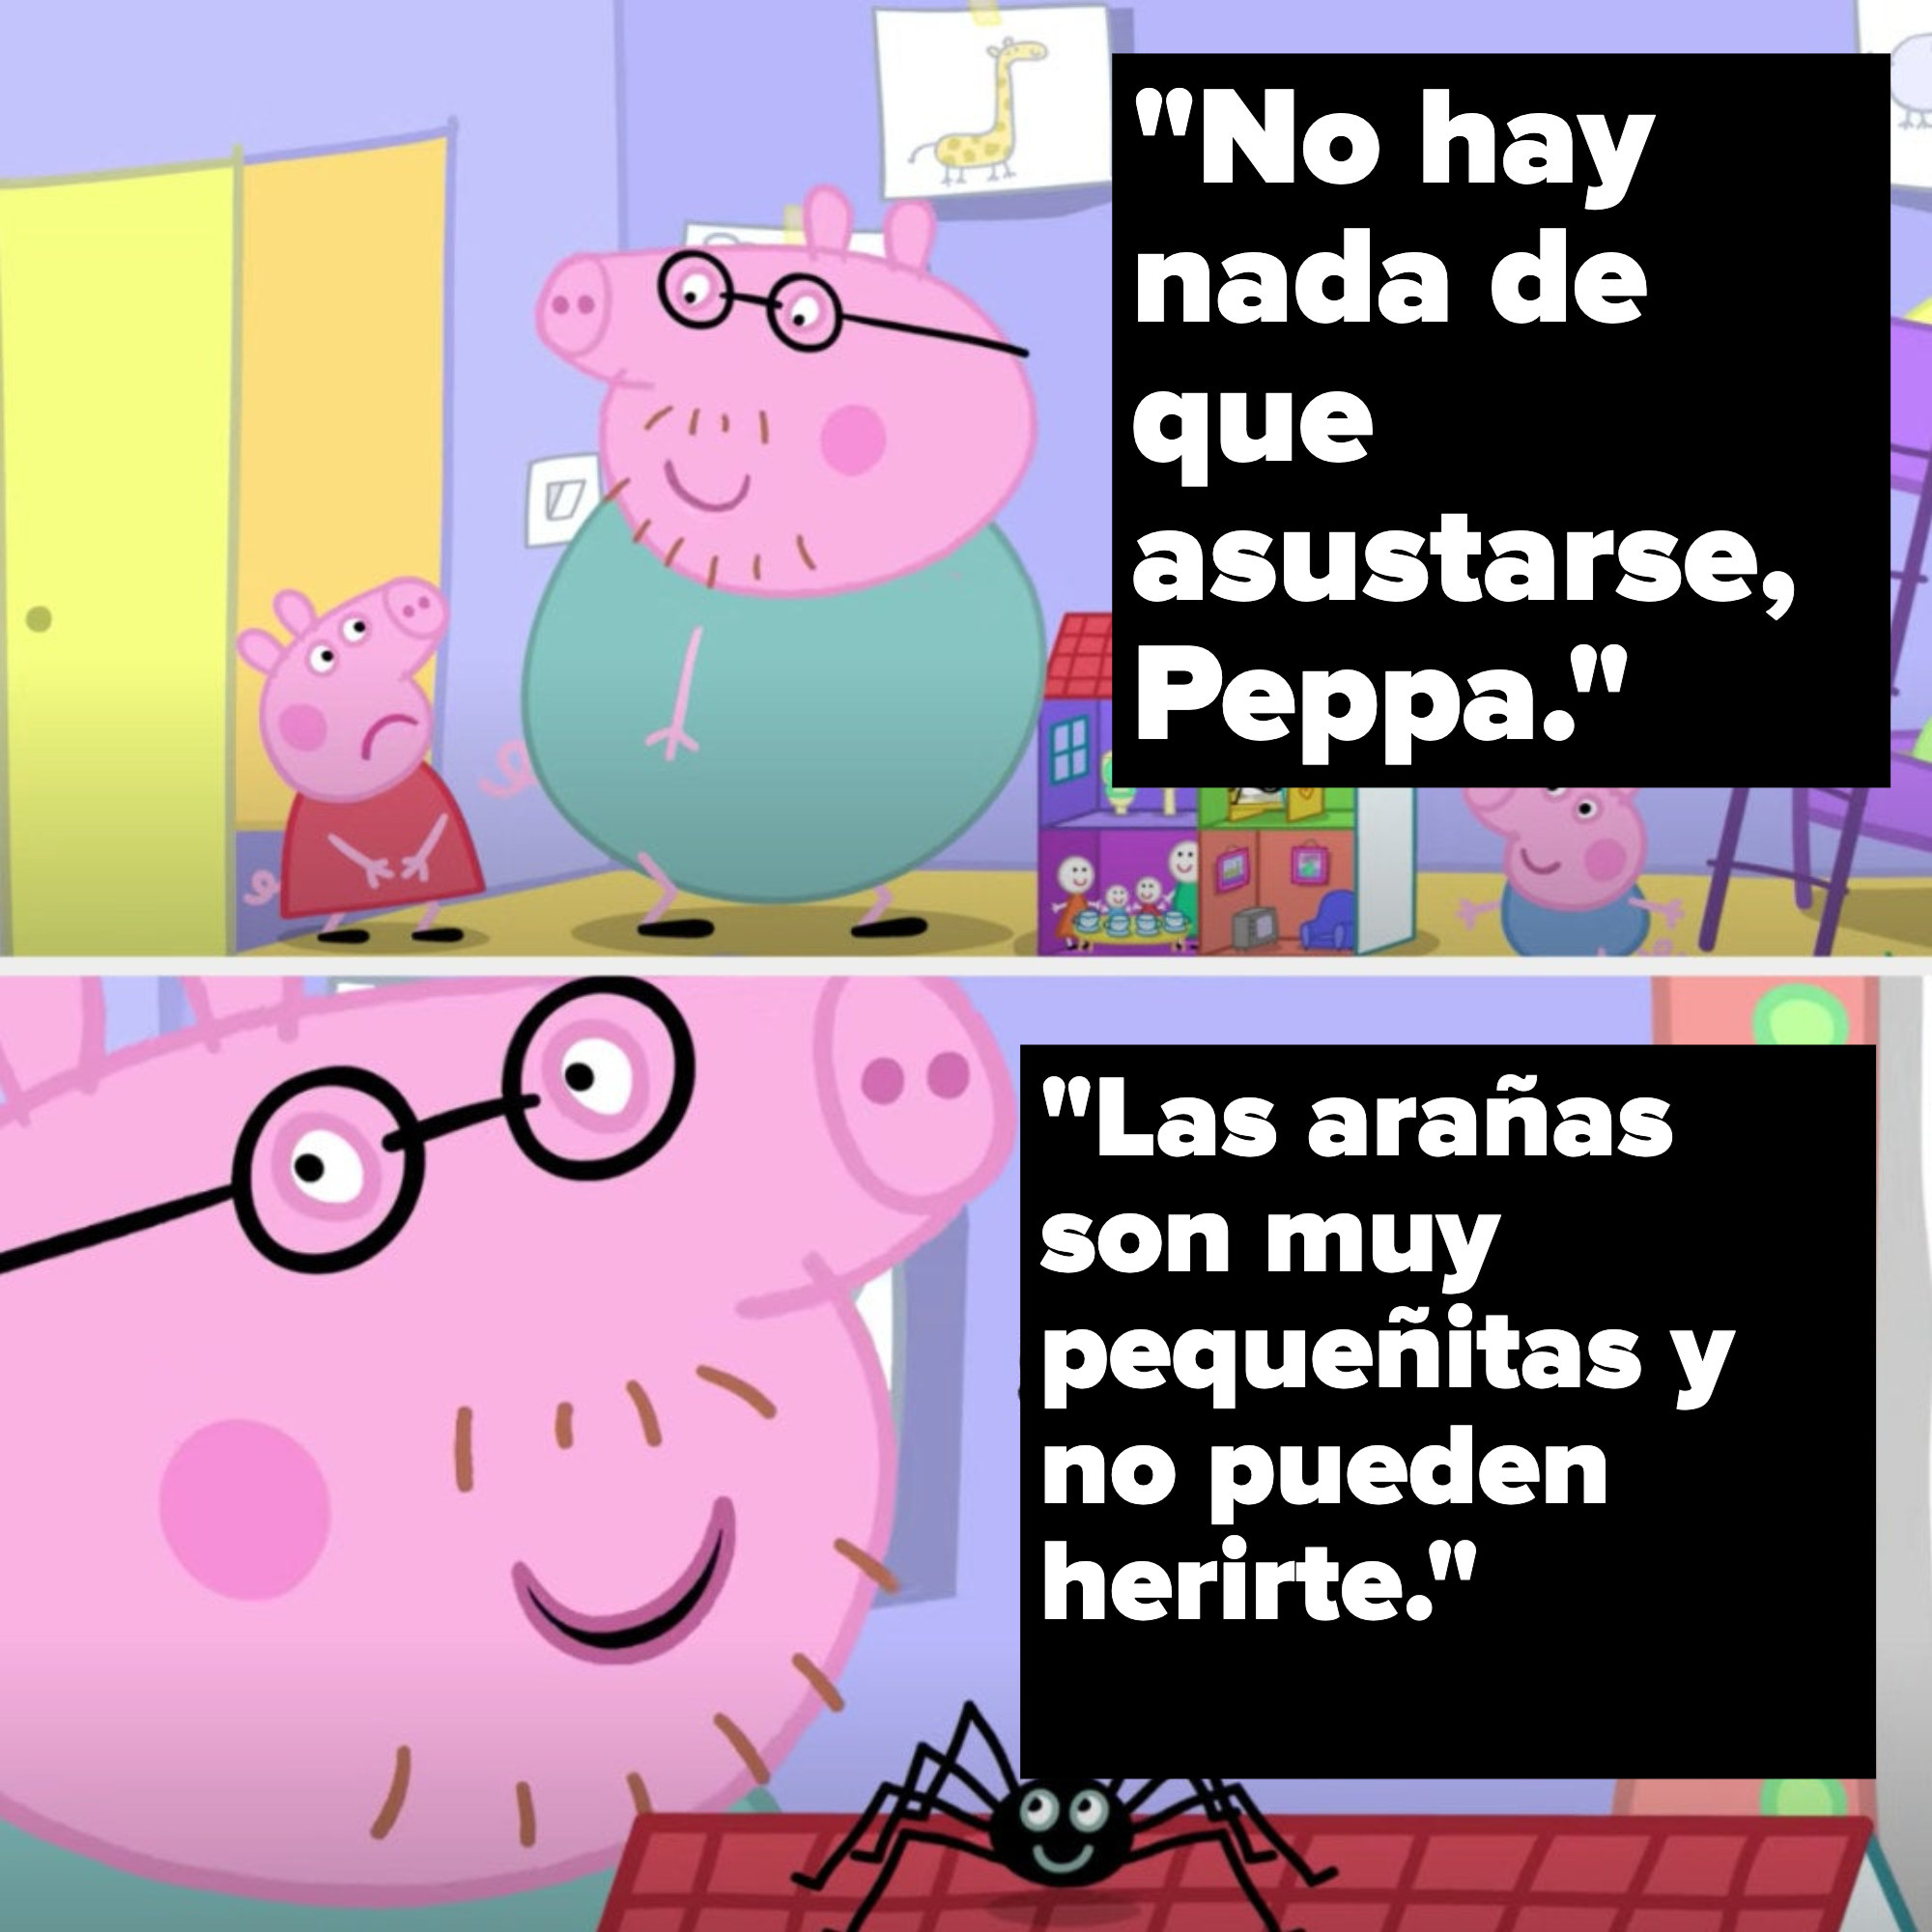 Peppa&#x27;s dad tells her there&#x27;s nothing to be afraid of because spiders are small and can&#x27;t hurt you